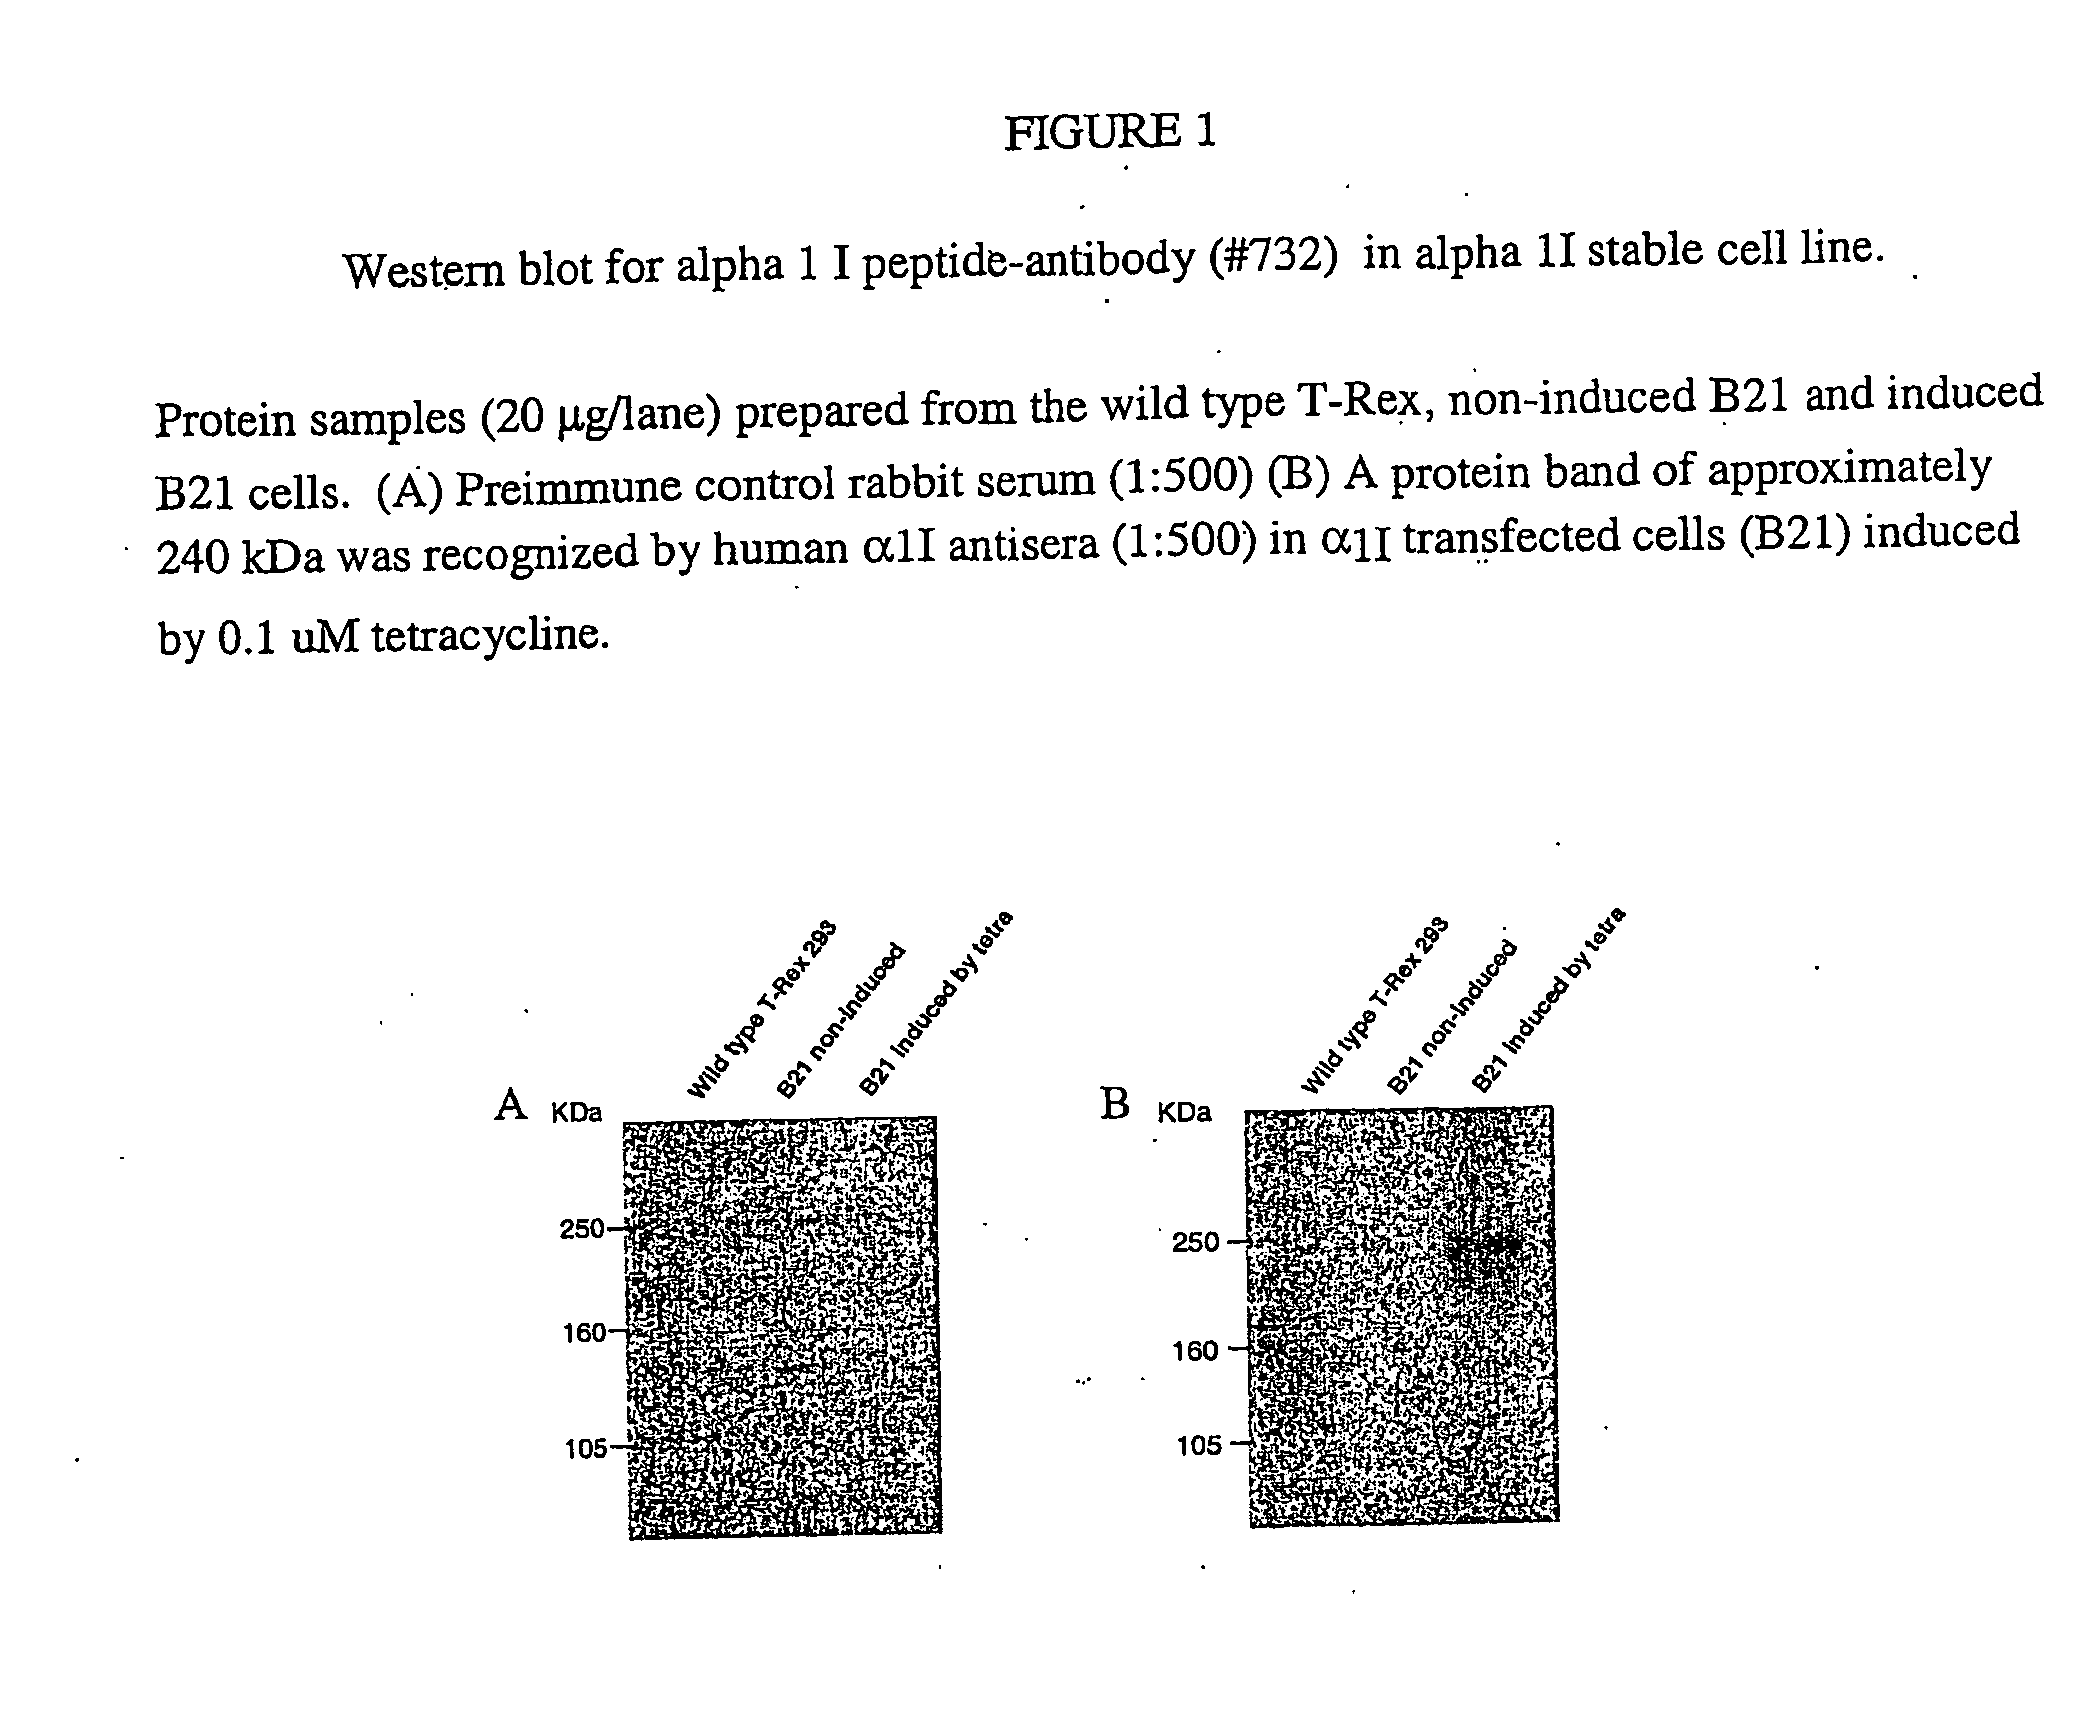 Nucleic Acid Molecules Encoding Novel Human Low-Voltage Activated Calcium Channel Proteins, Designed-Alpha 1I-1 and Alpha 1I-2, Encoded Proteins and Methods of Use Thereof